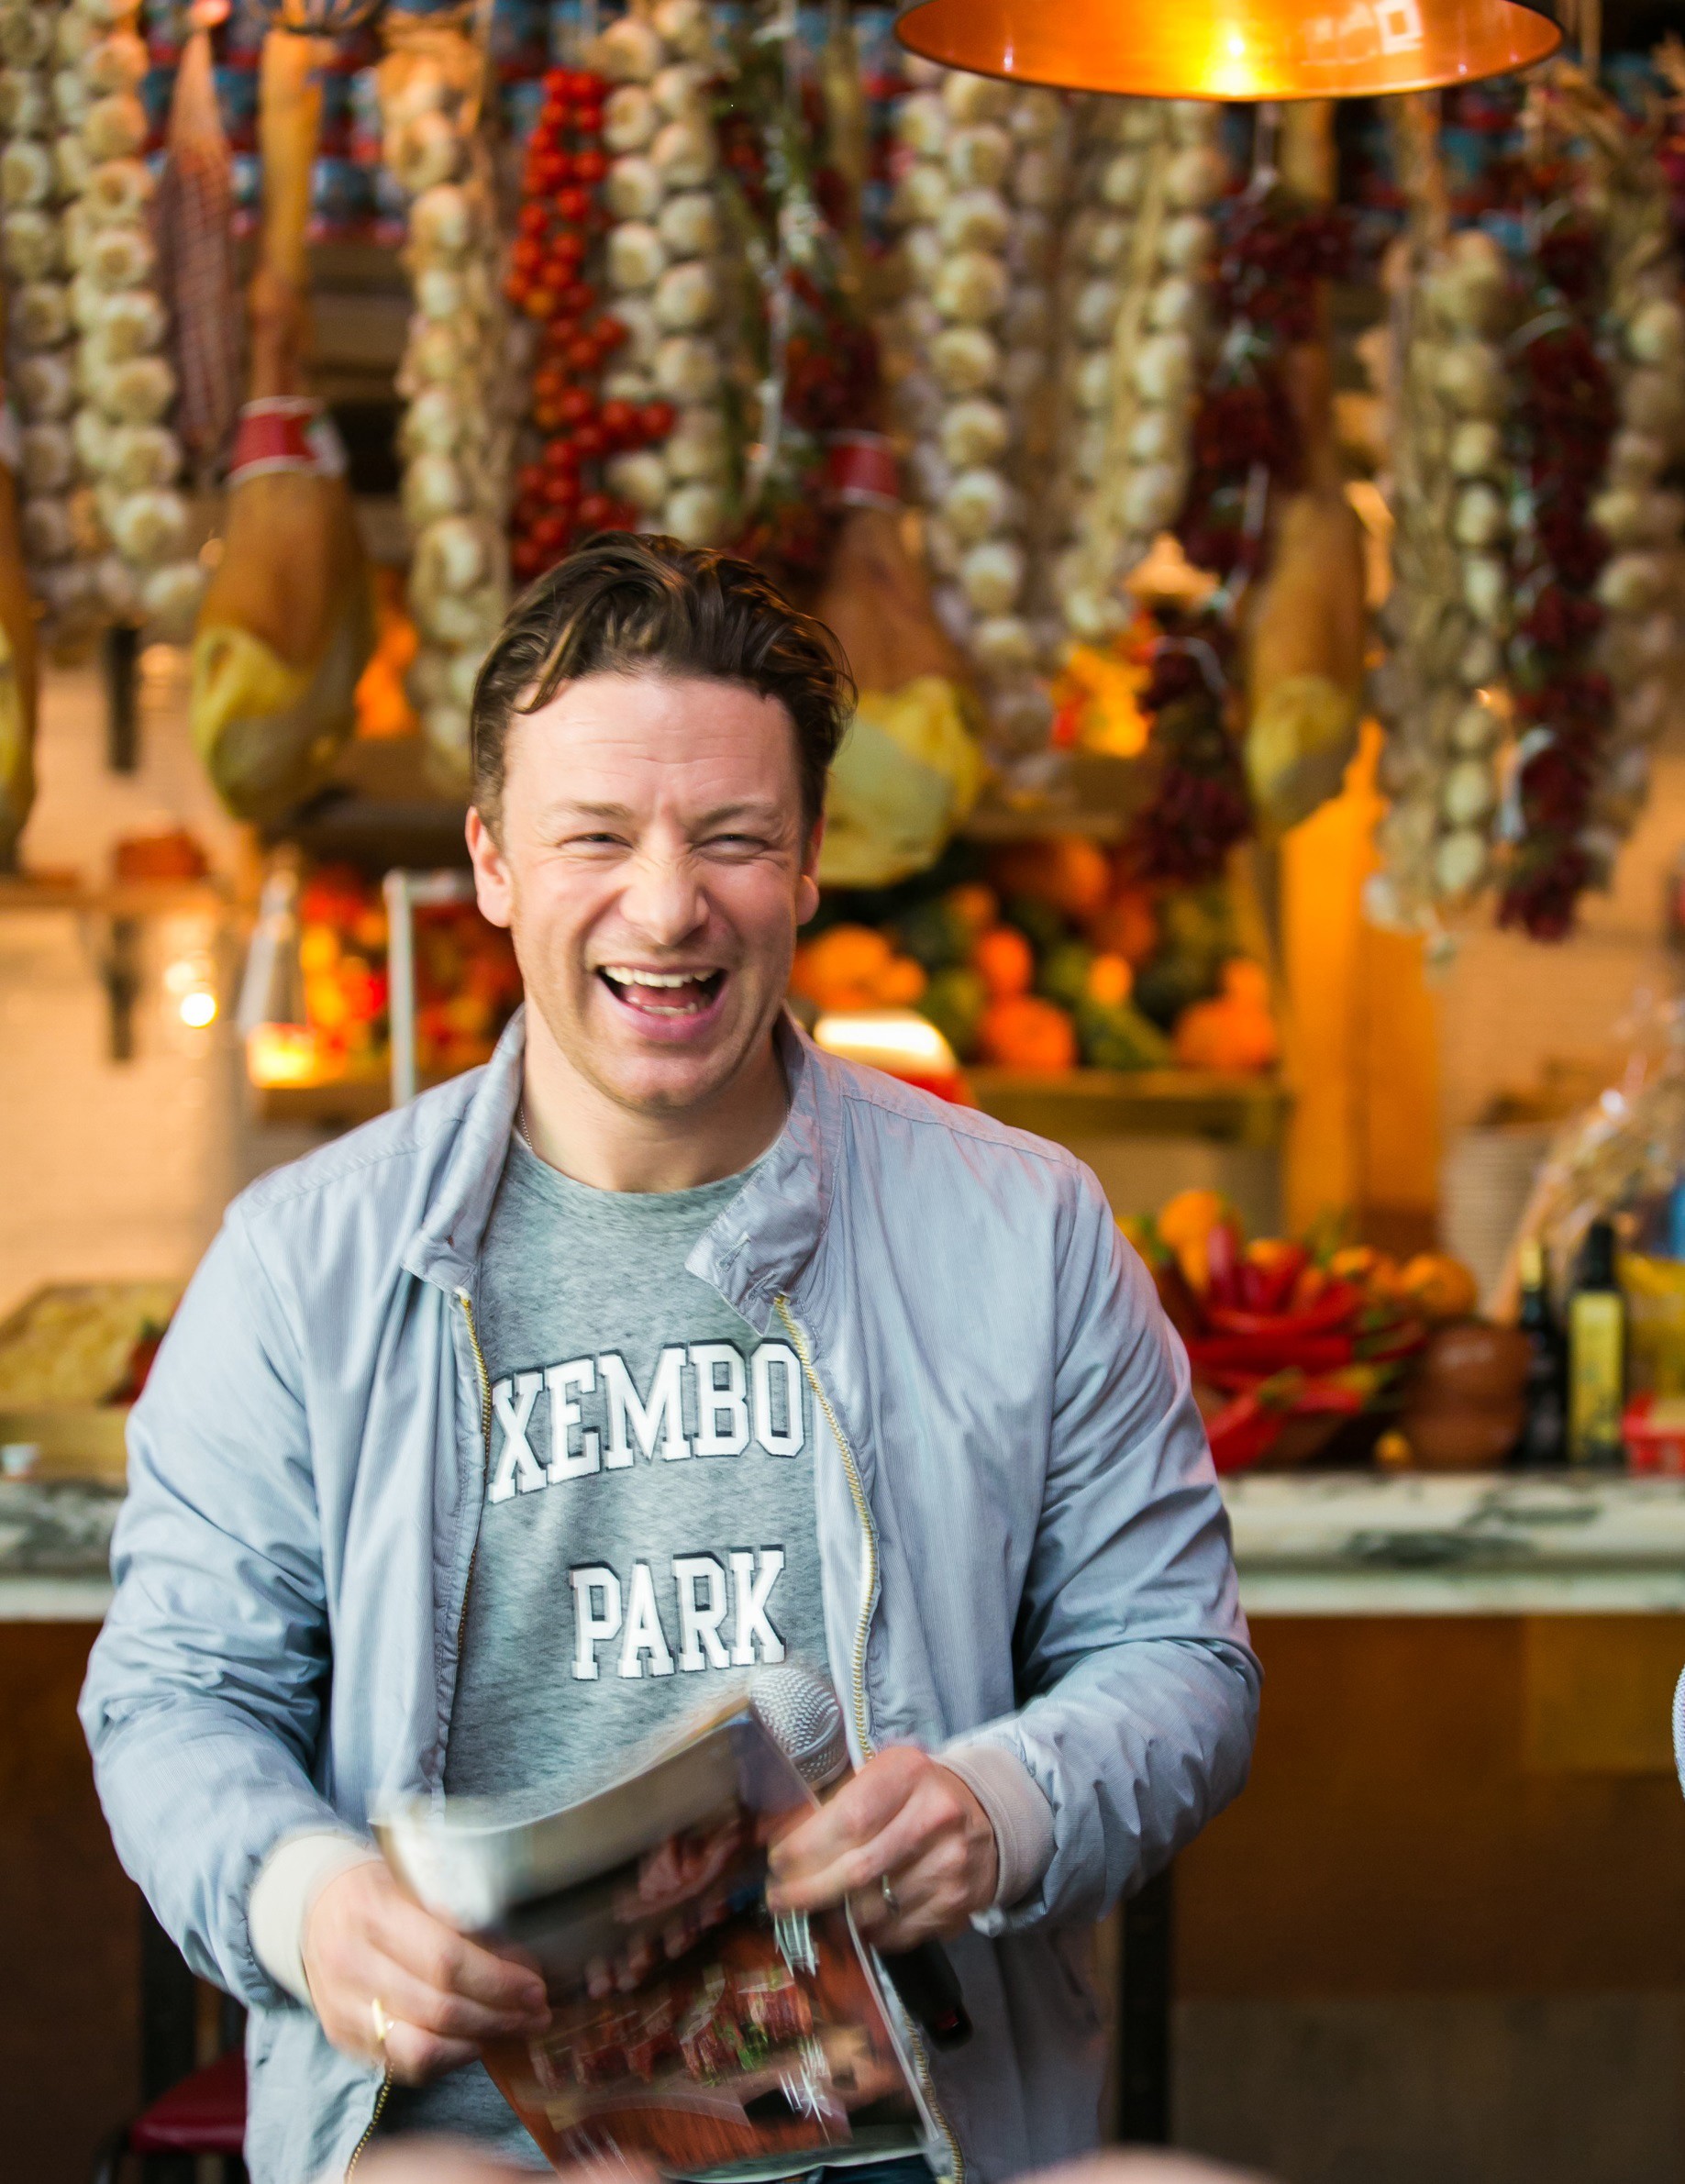 Jamie Oliver is veering into cultural appropriation. Because he's